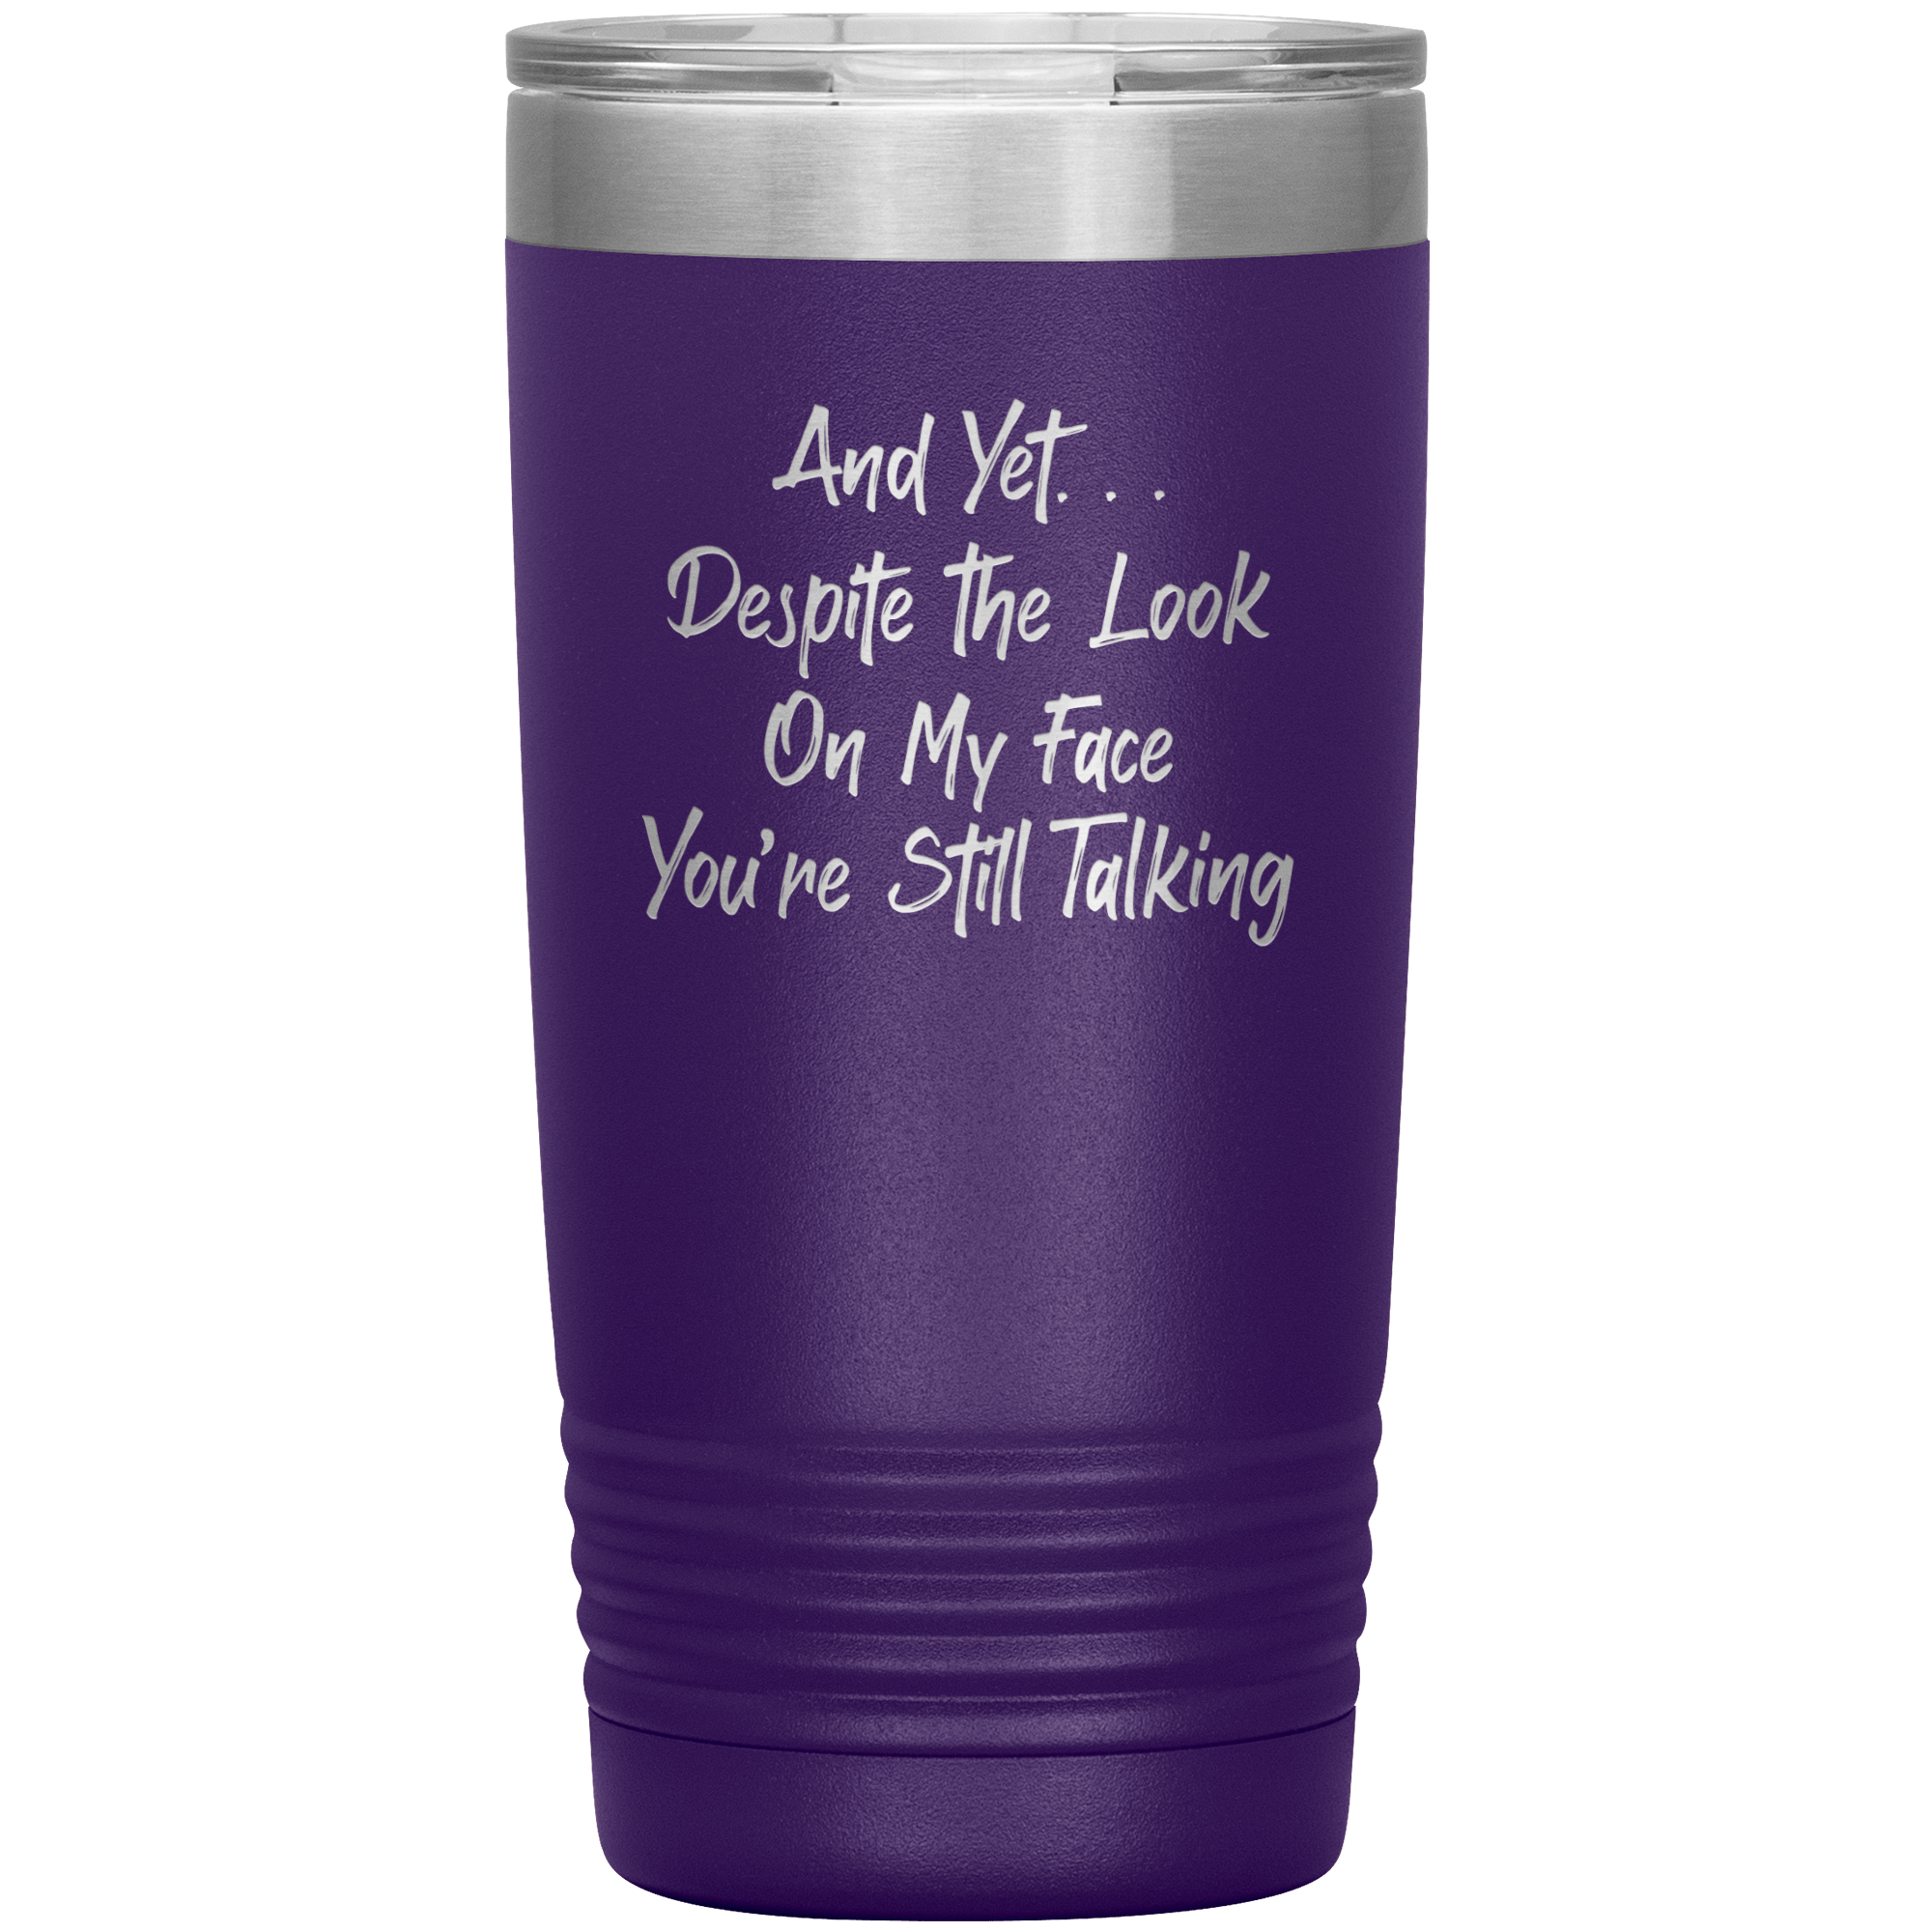 Copy of "  DESPITE THE LOOK ON MY FACE YOU ARE STILL TALKING  " TUMBLER